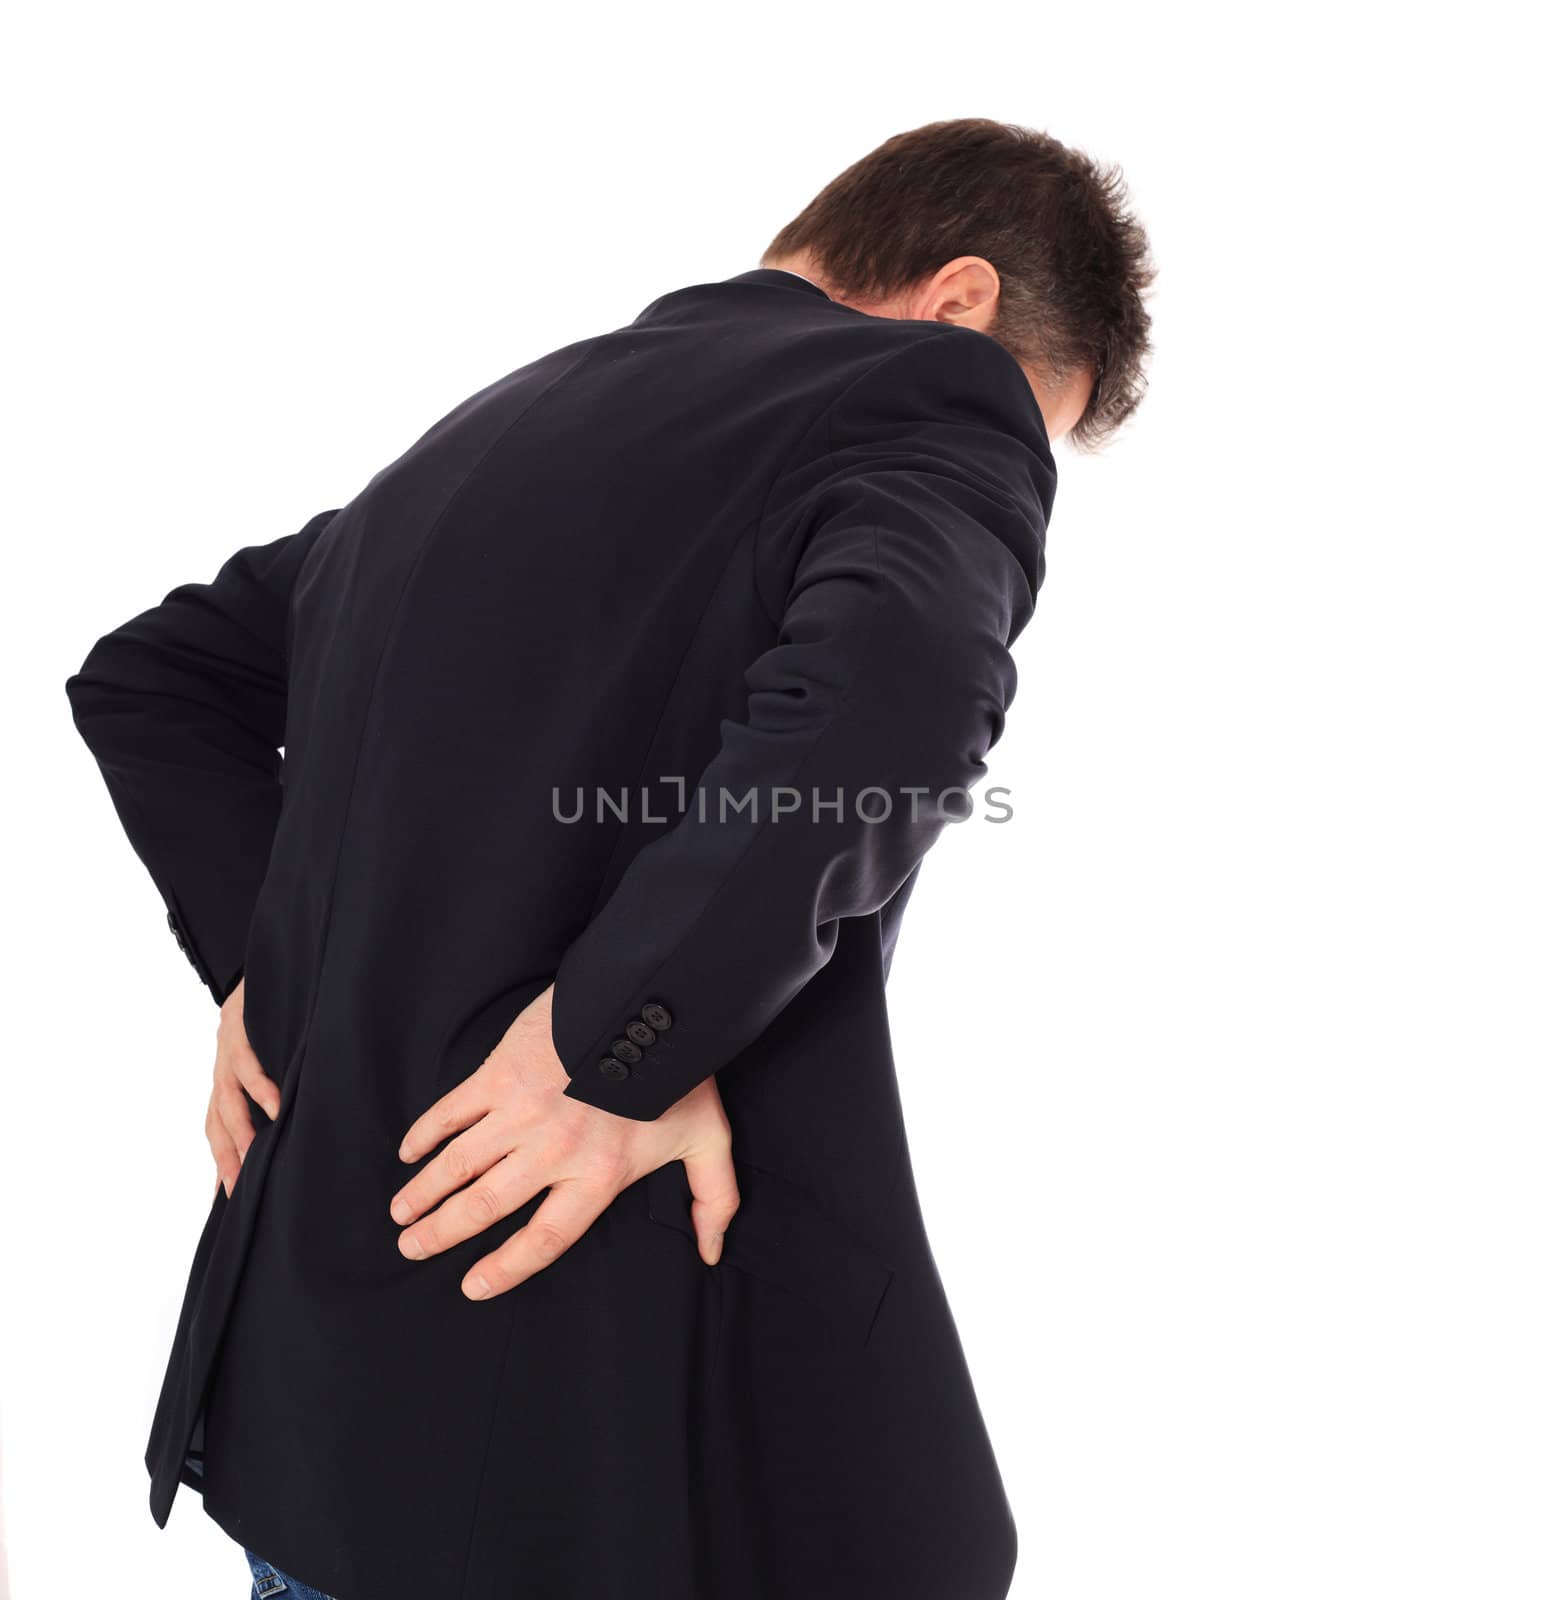 Middle-aged man suffering from back pain. All on white background.